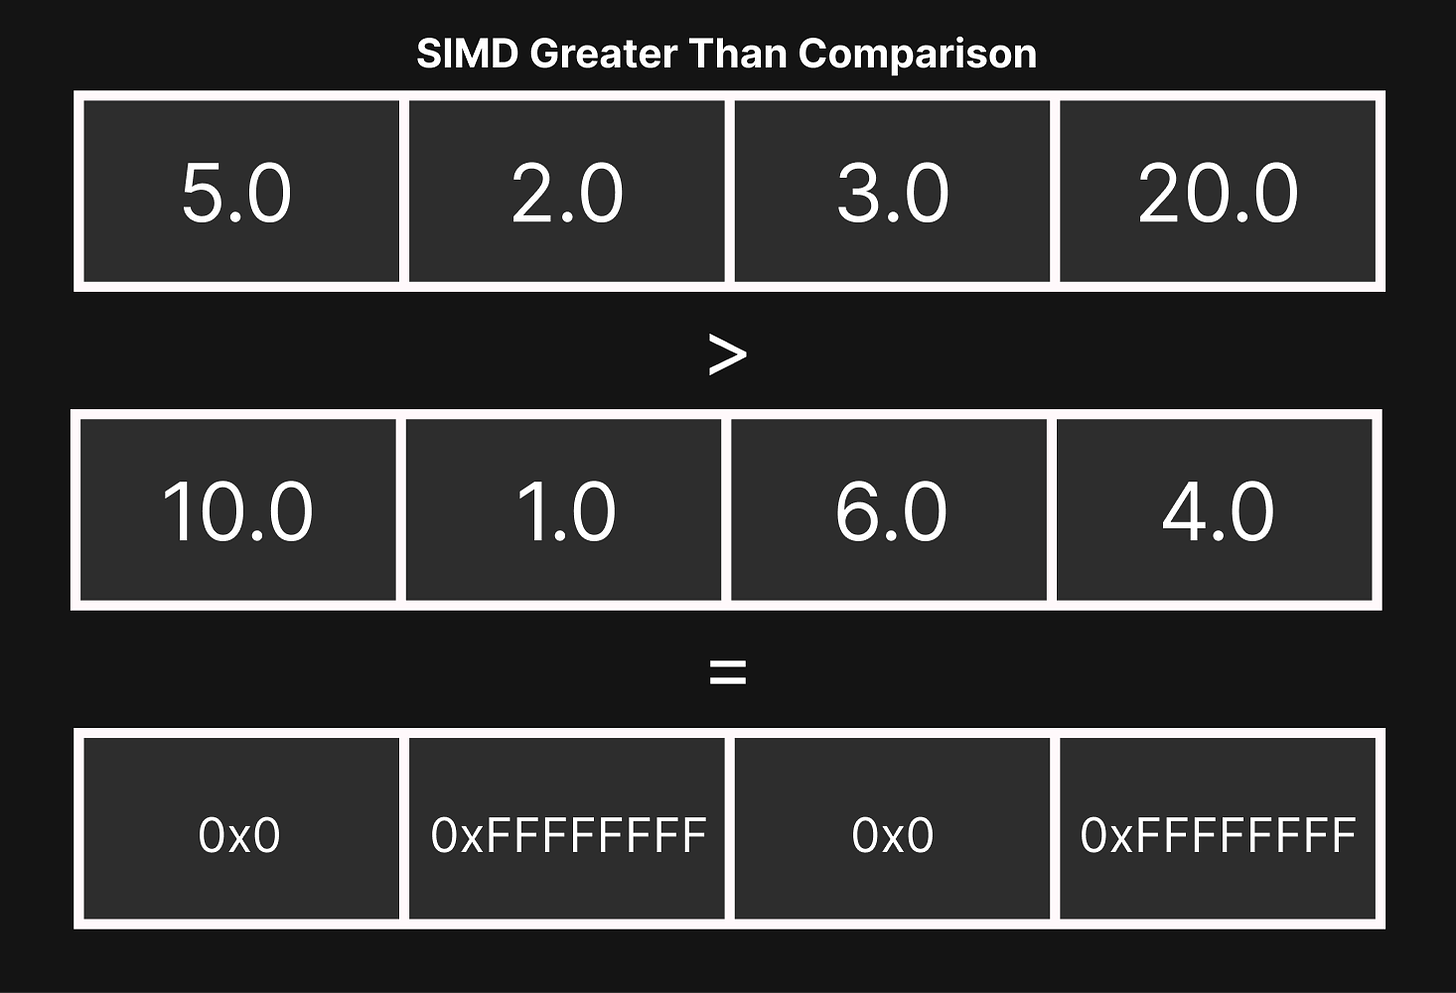 An example of how SIMD comparison operators work